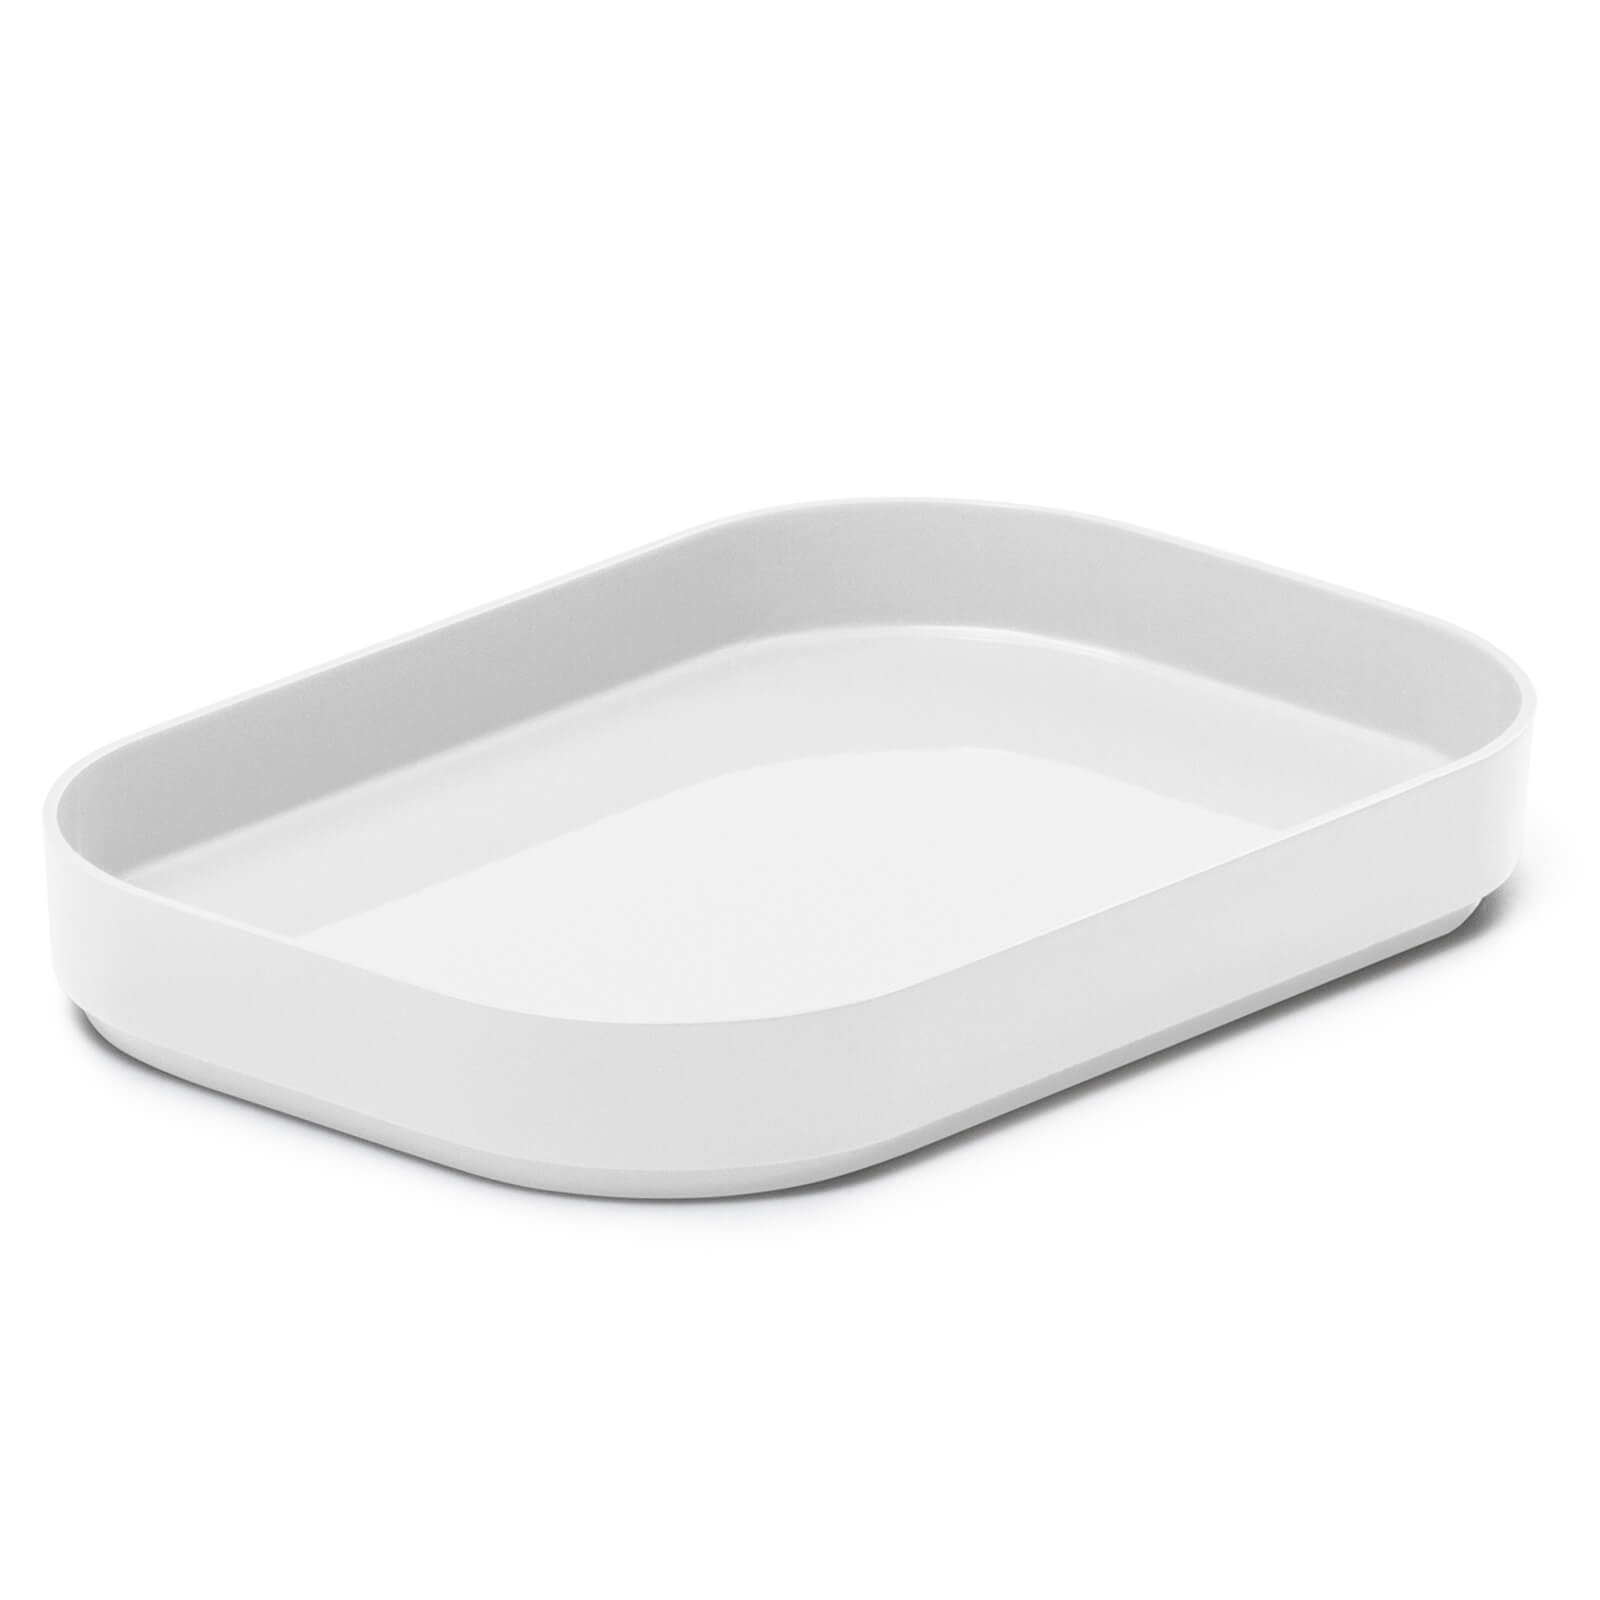 Photo of Smartstore Compact Xs Lid - White